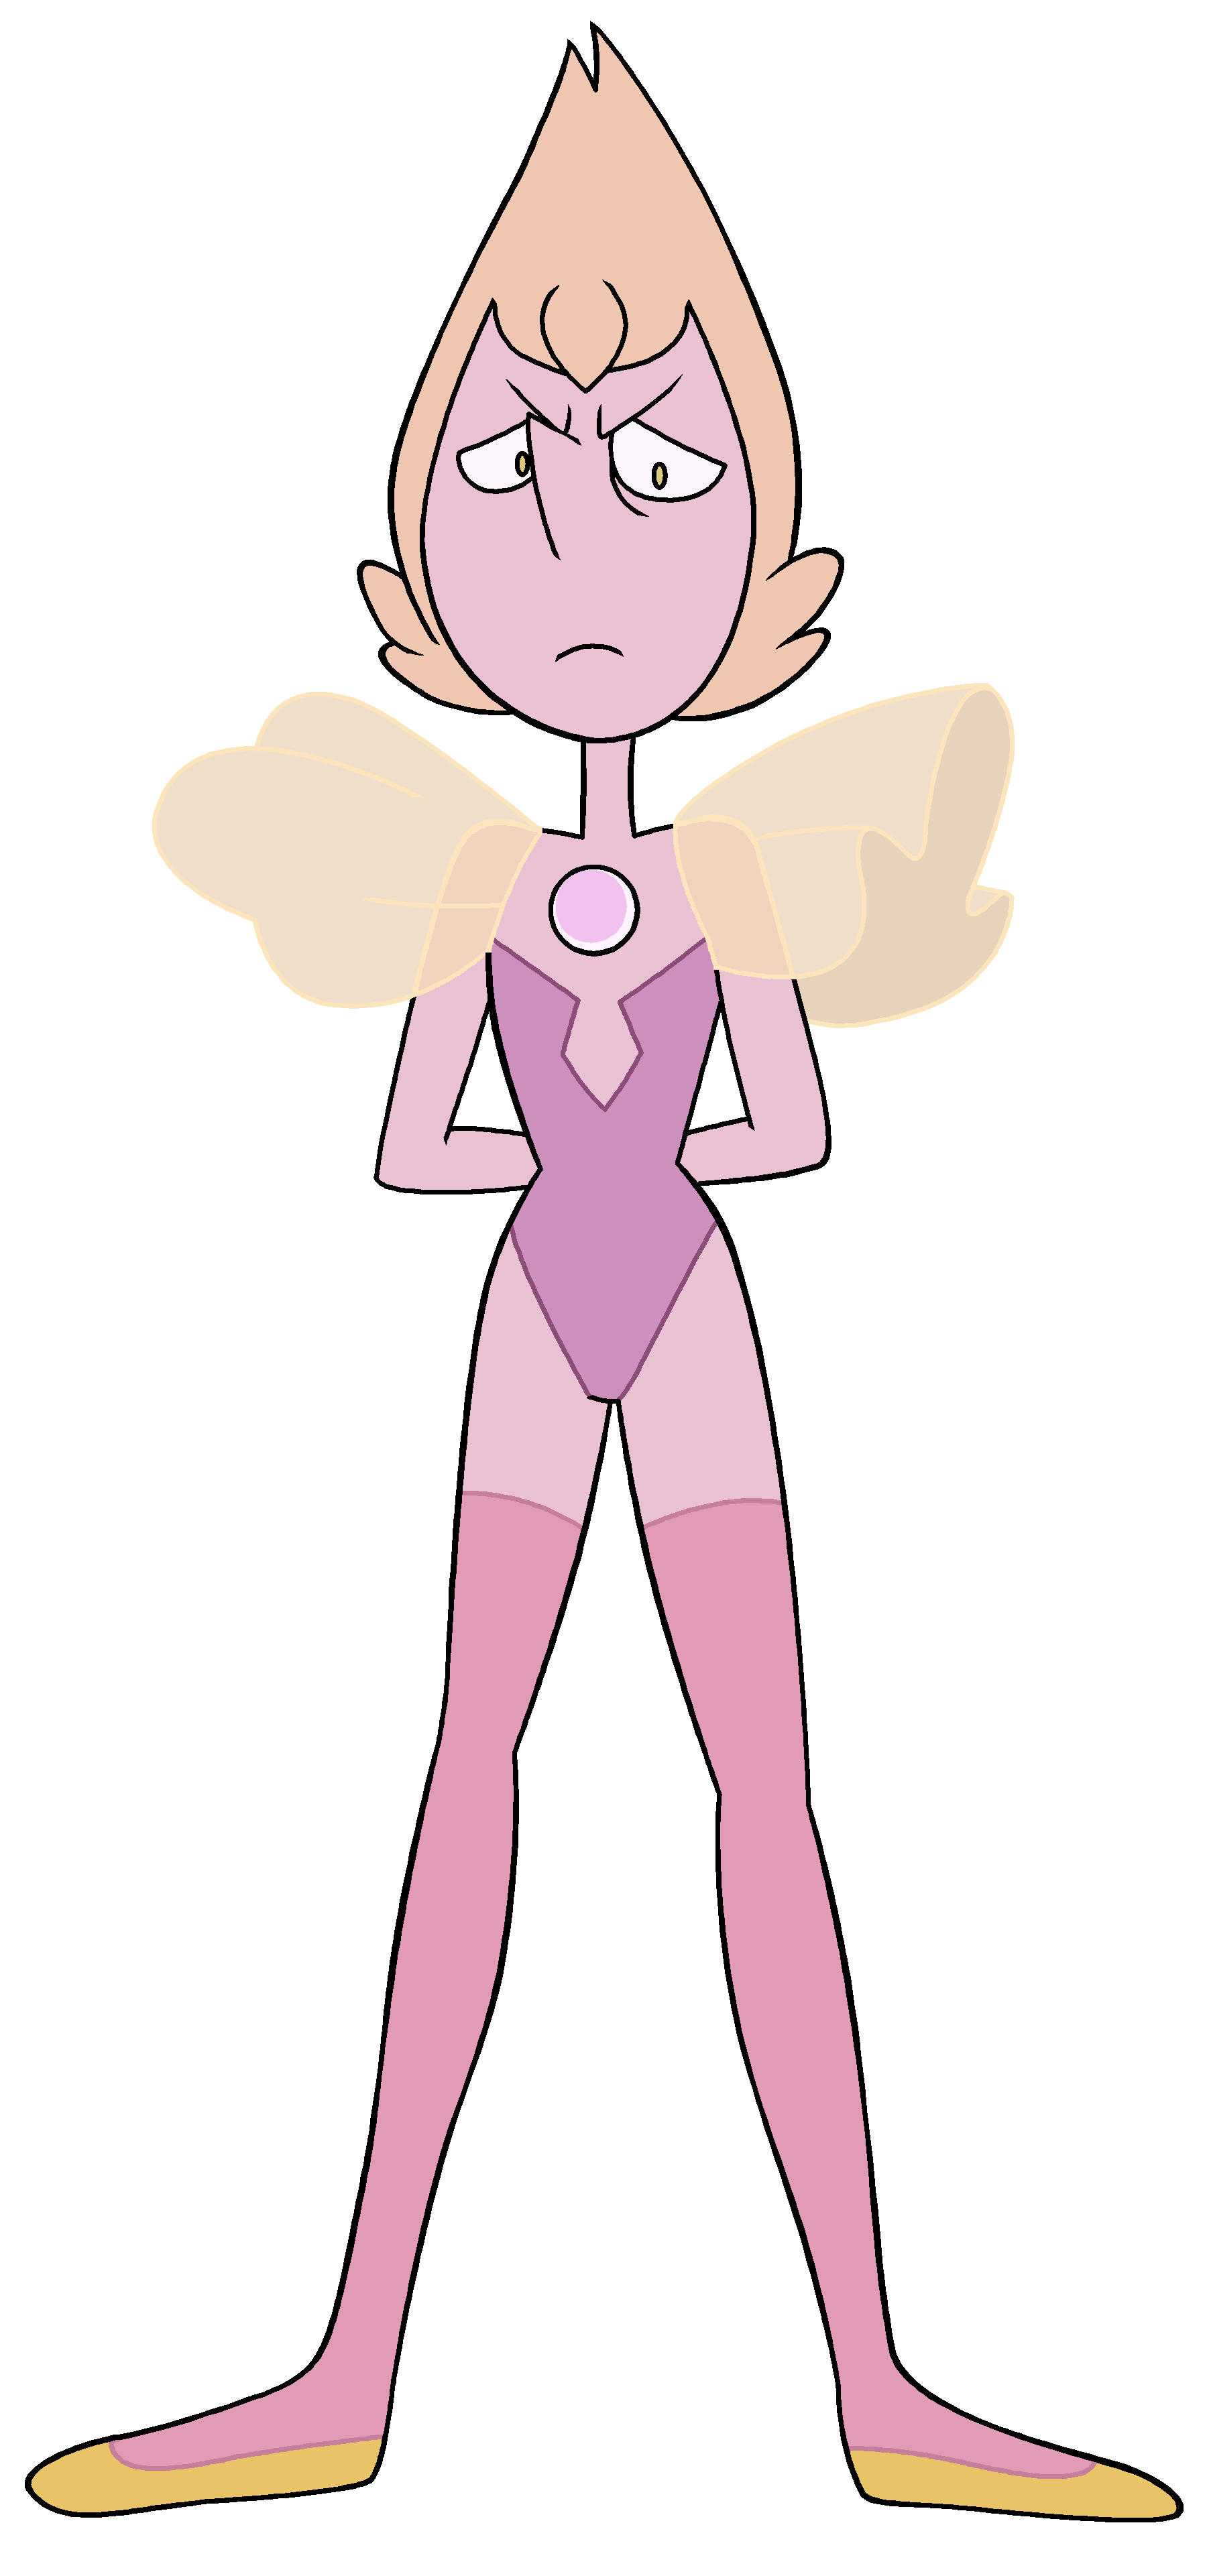 Image Yellow Pearl Colorpng Steven Universe Wiki Fandom Powered By Wikia 